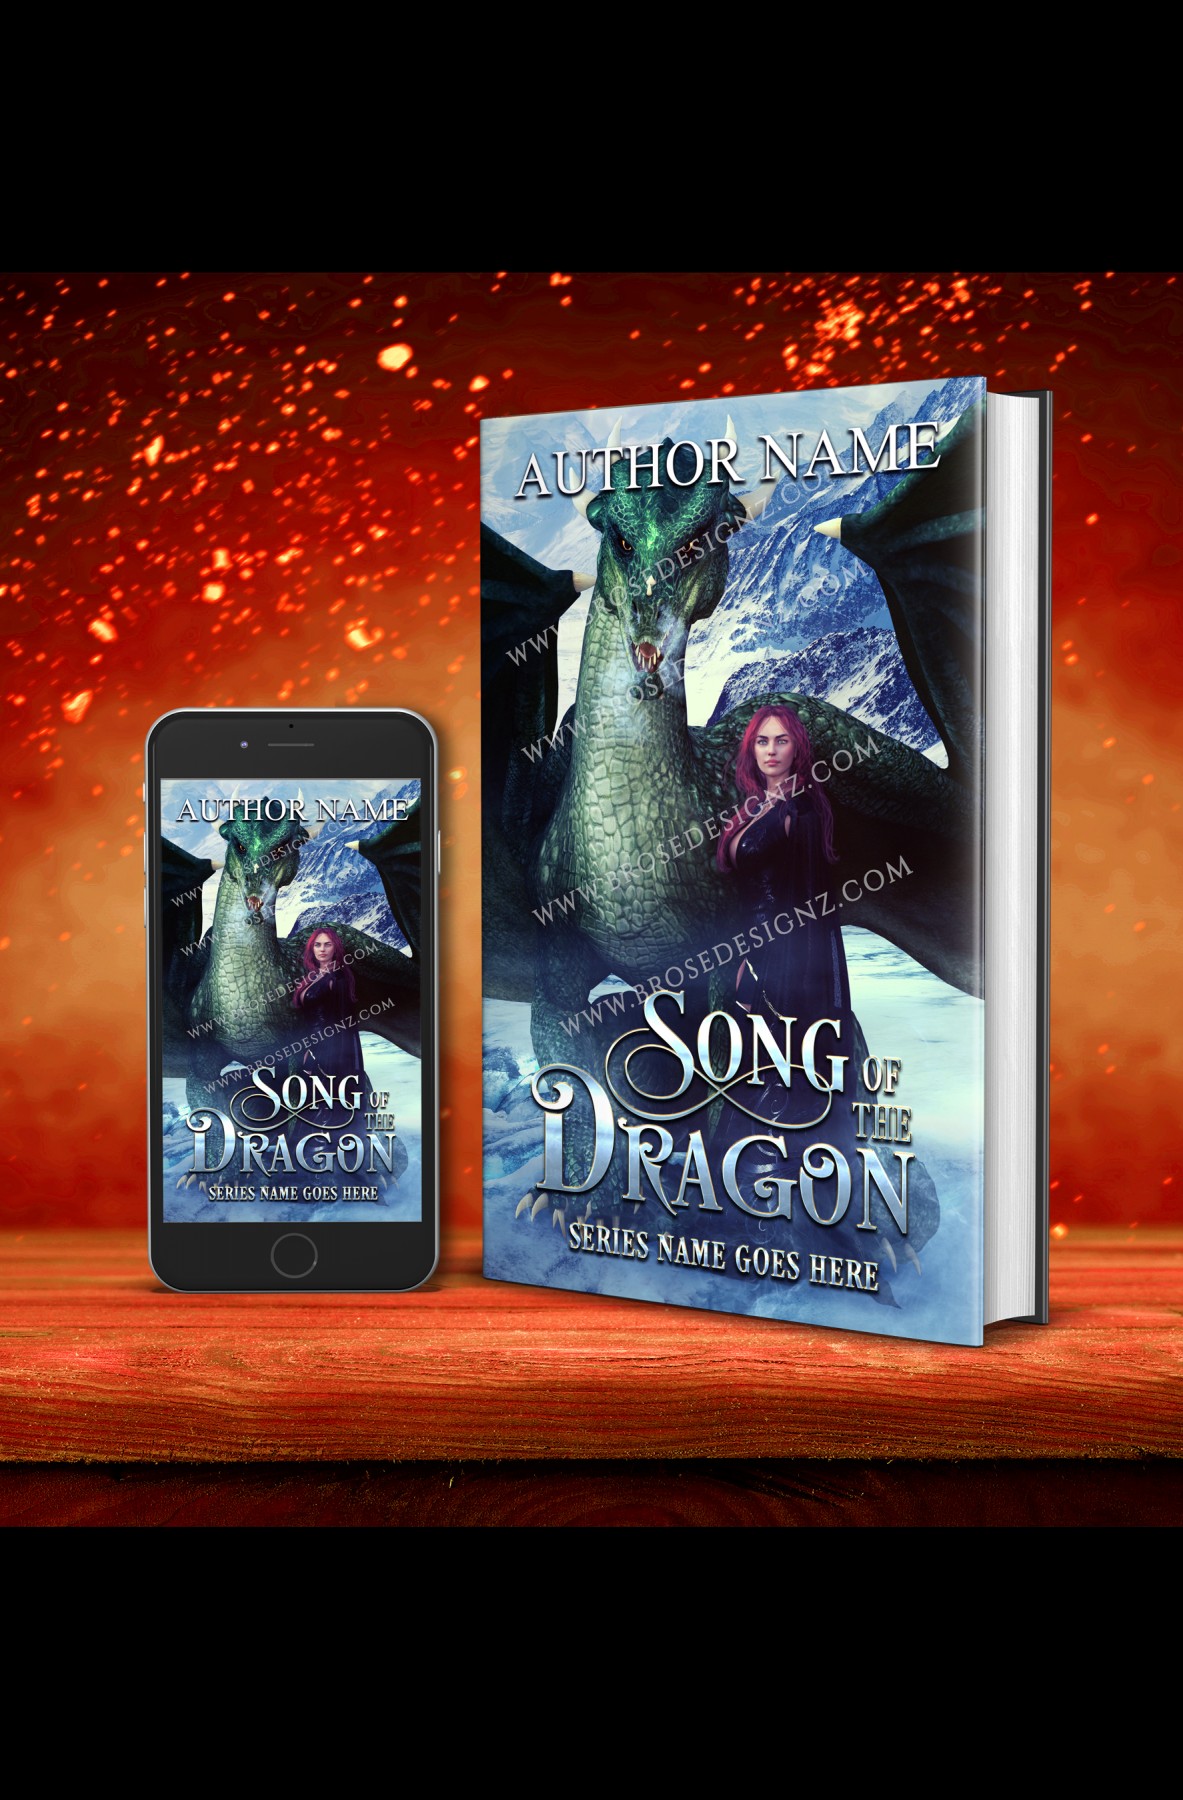 Song of the dragon - The Book Cover Designer